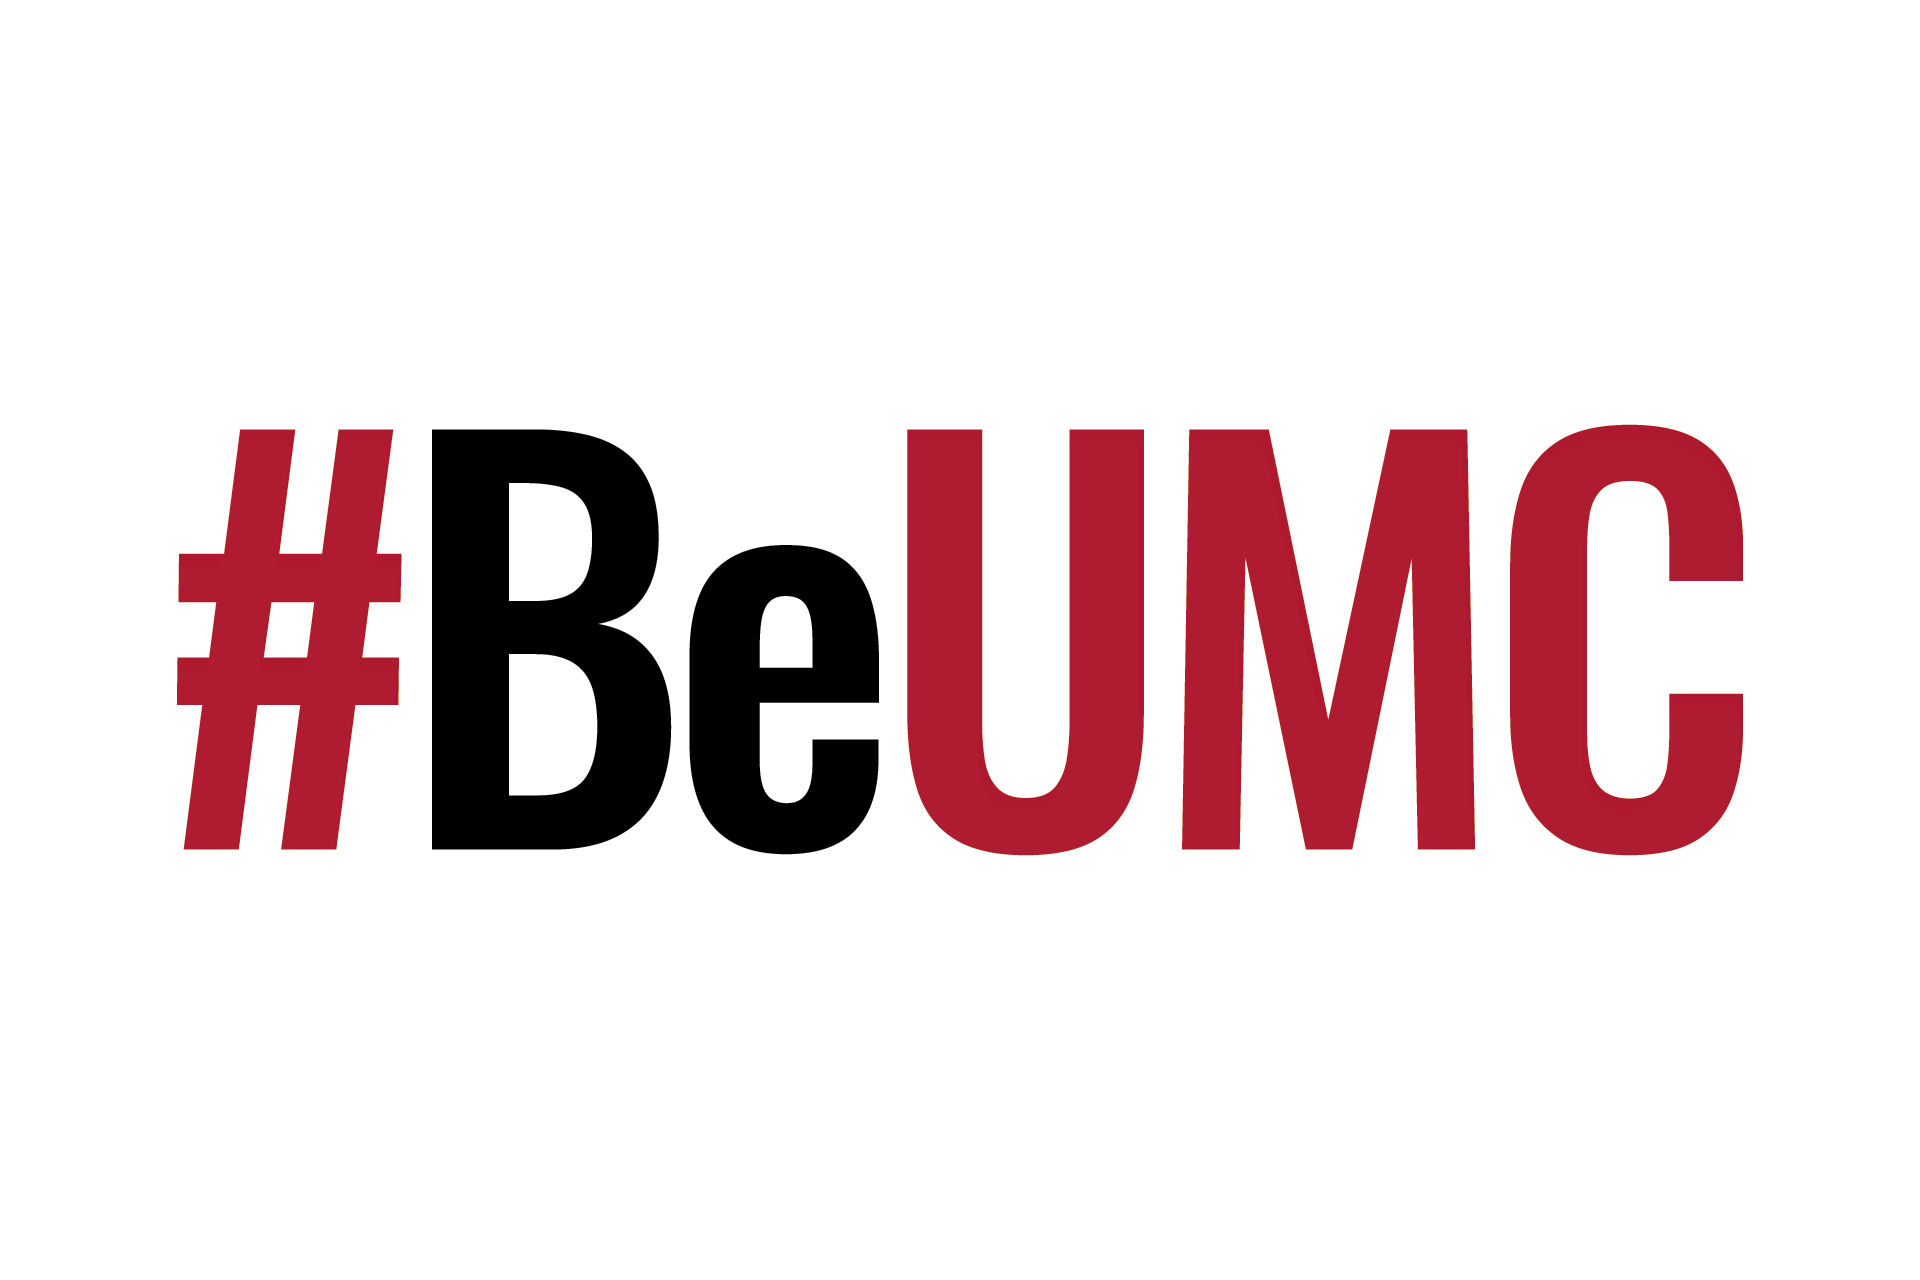 The #BeUMC campaign reminds us of who we are at our best. As people of God called The United Methodist Church, we’re faithful followers of Jesus seeking to make the world a better place. #BeUMC red and black logo on white background.